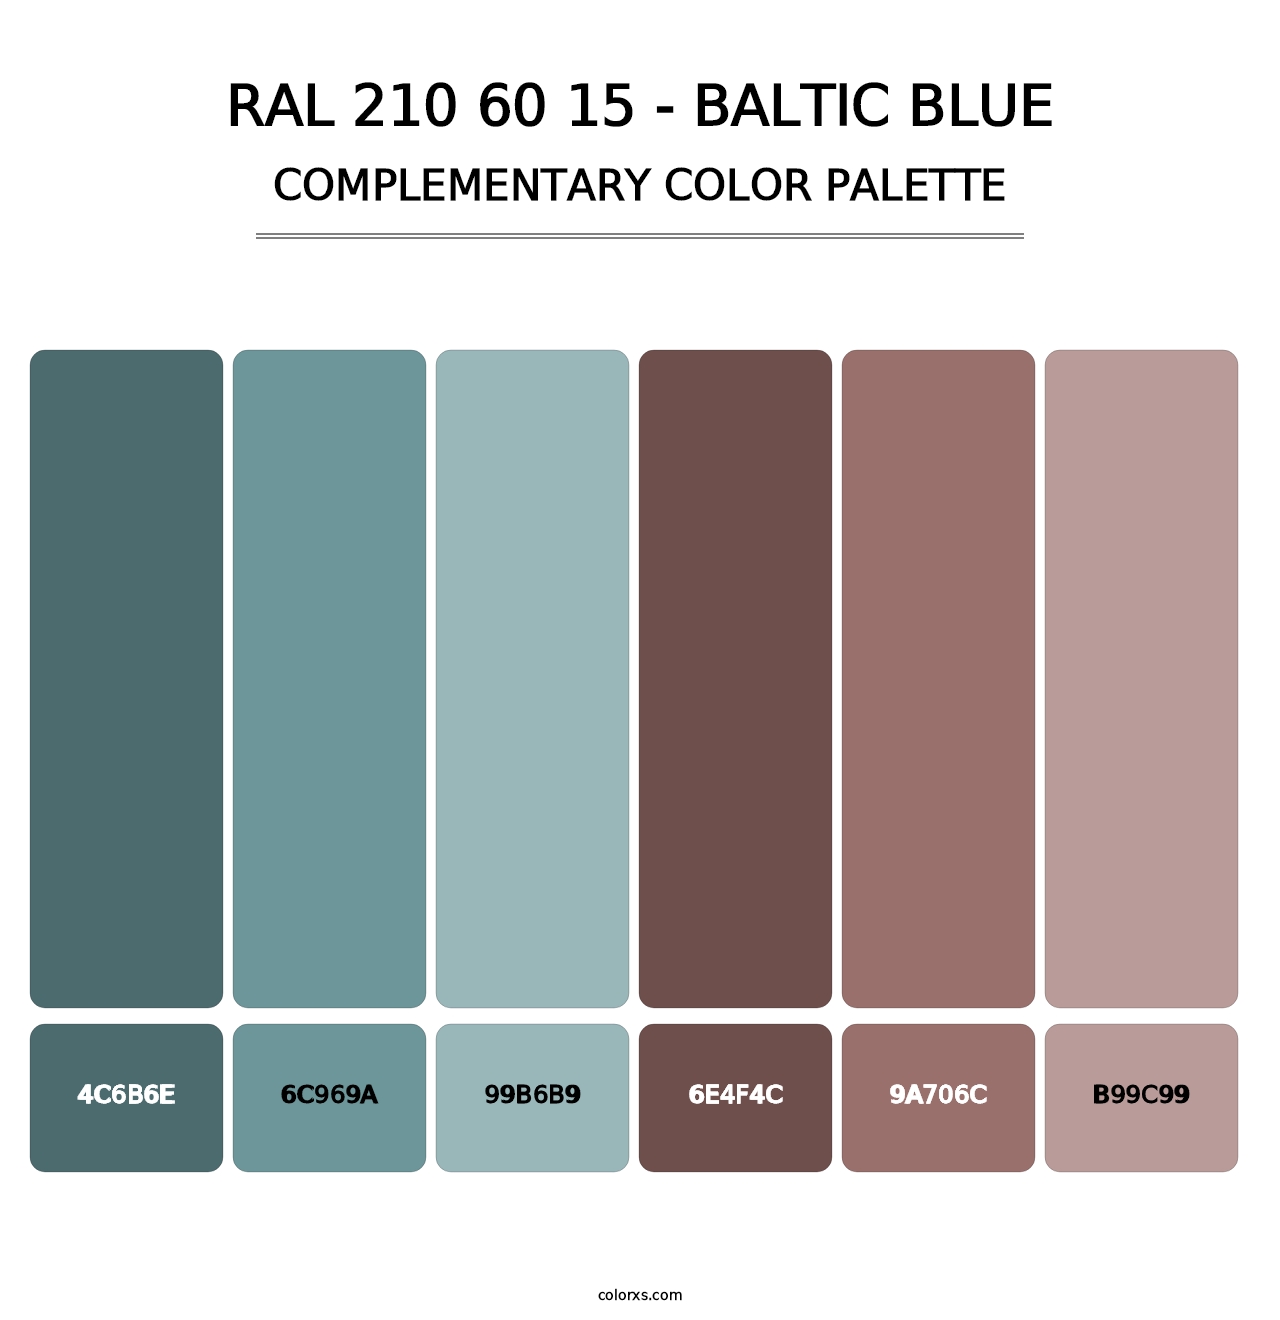 RAL 210 60 15 - Baltic Blue - Complementary Color Palette